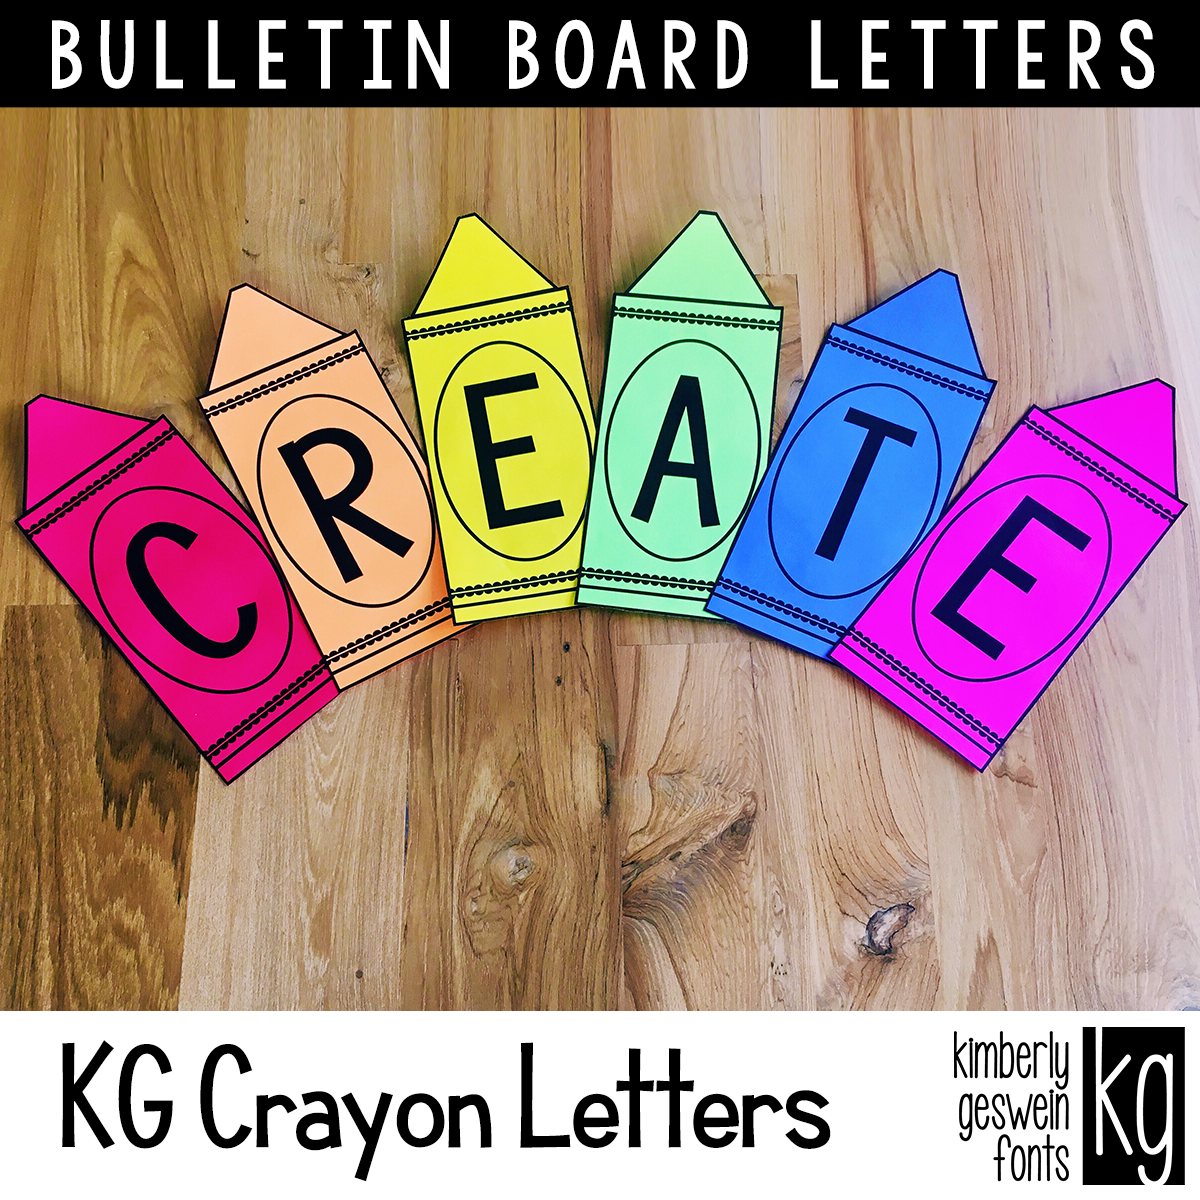 Printable Bulletin Board Letters A-Z a-z 0-9 - for classroom or home!